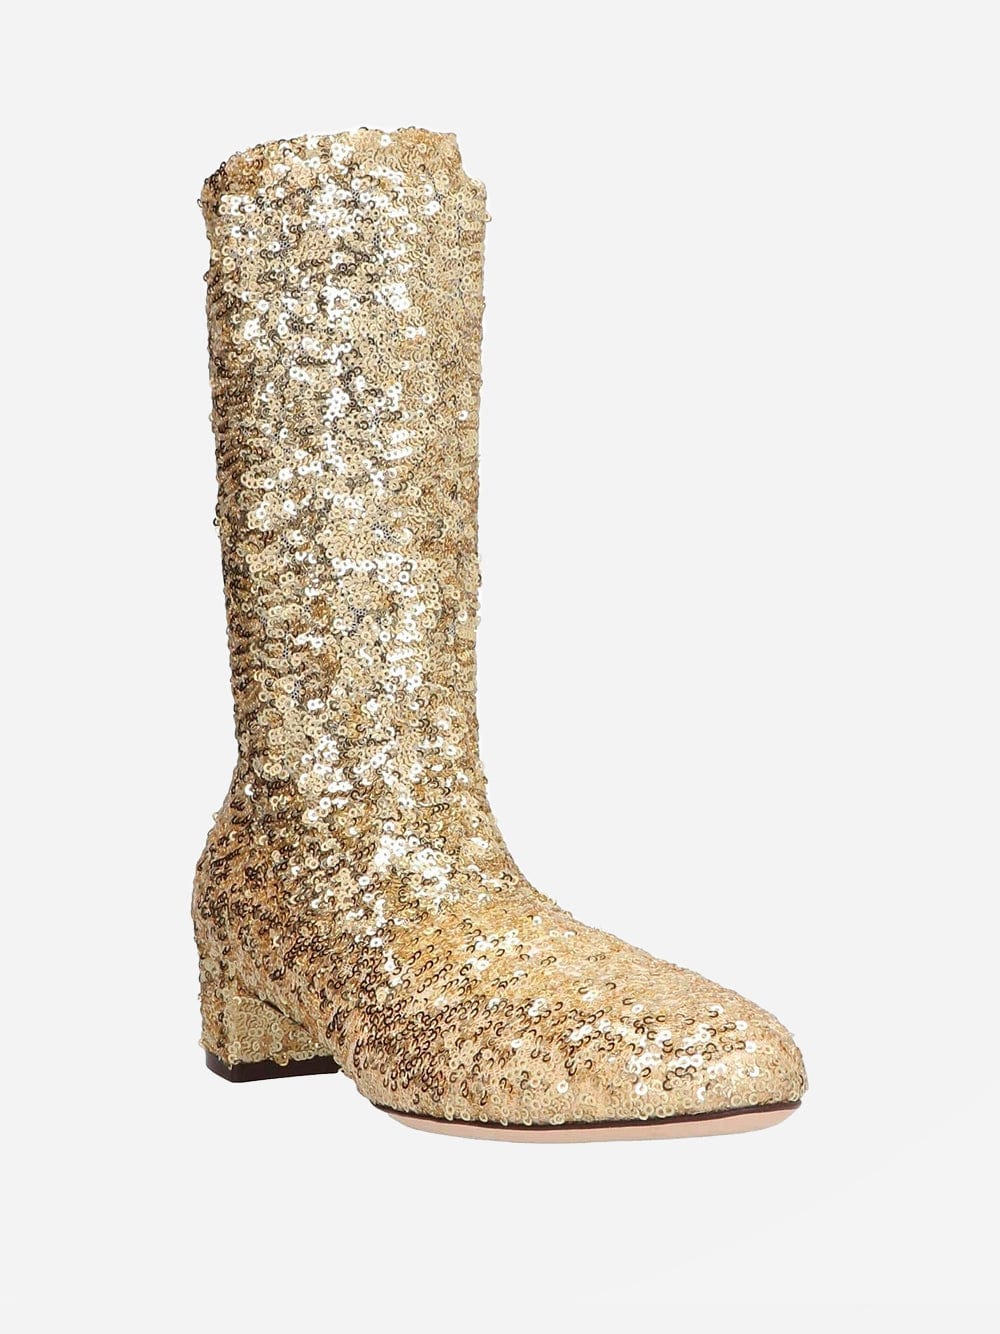 Dolce & Gabbana Metallic Sequin Ankle Boots